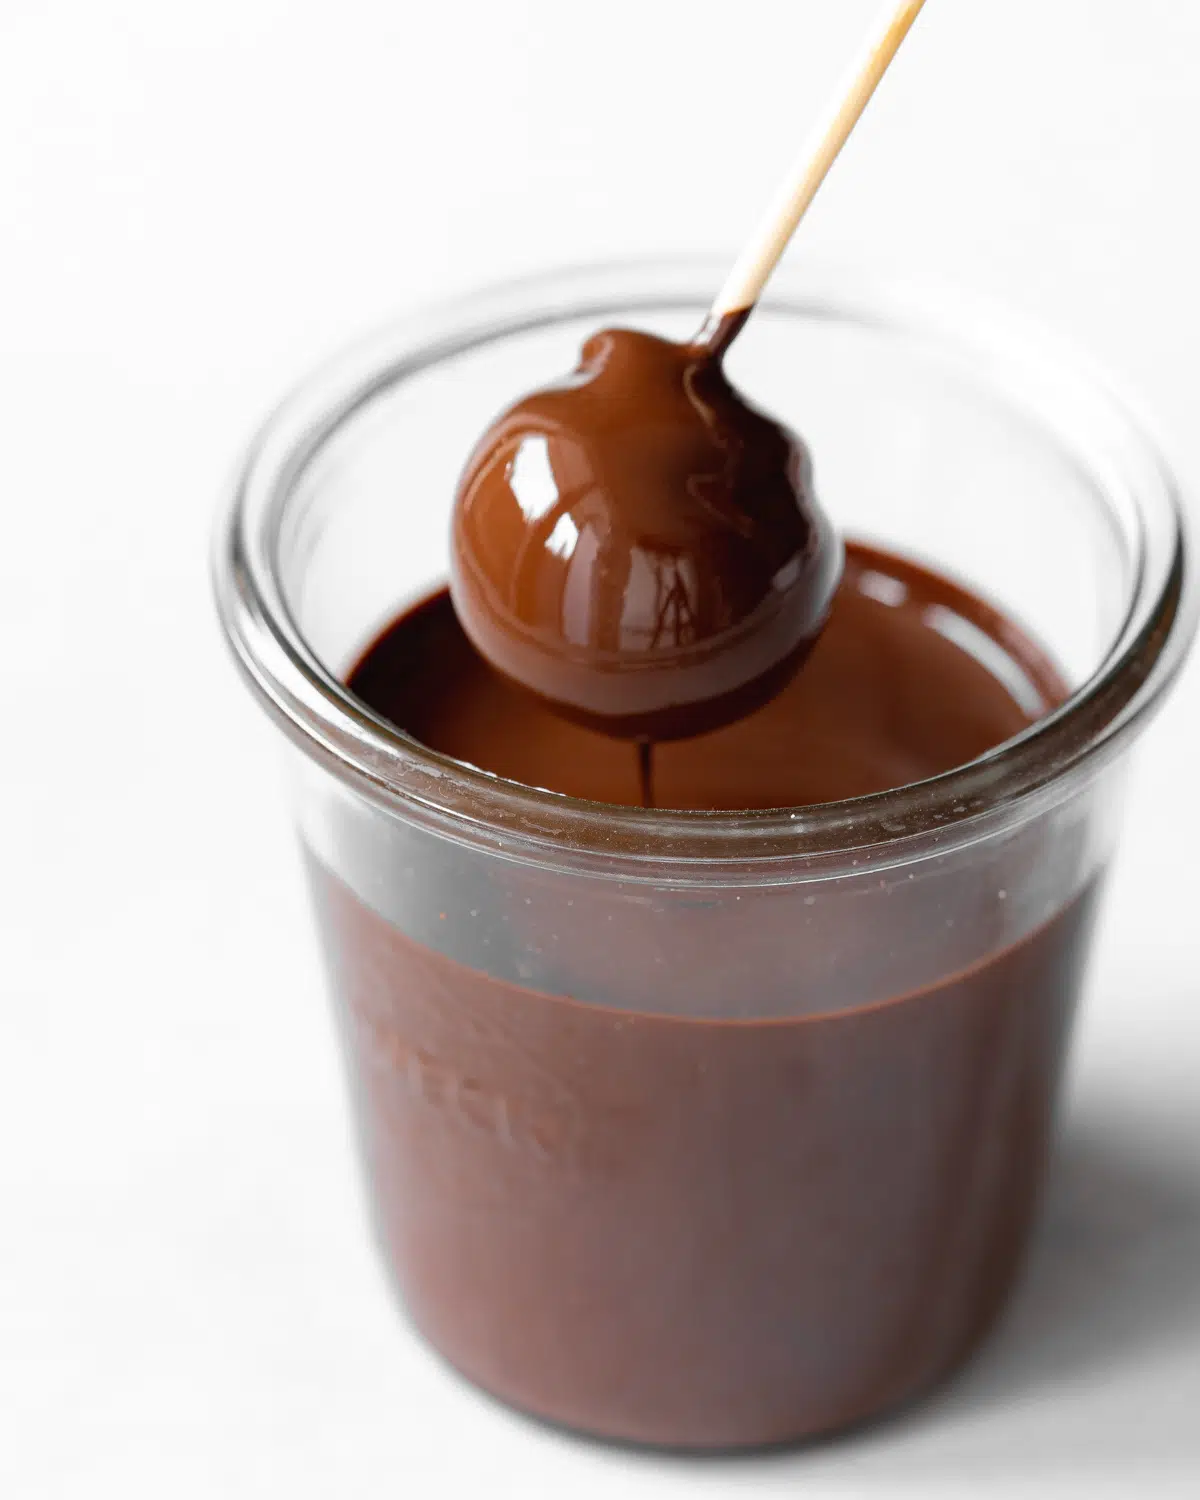 dipping truffle into chocolate sauce.